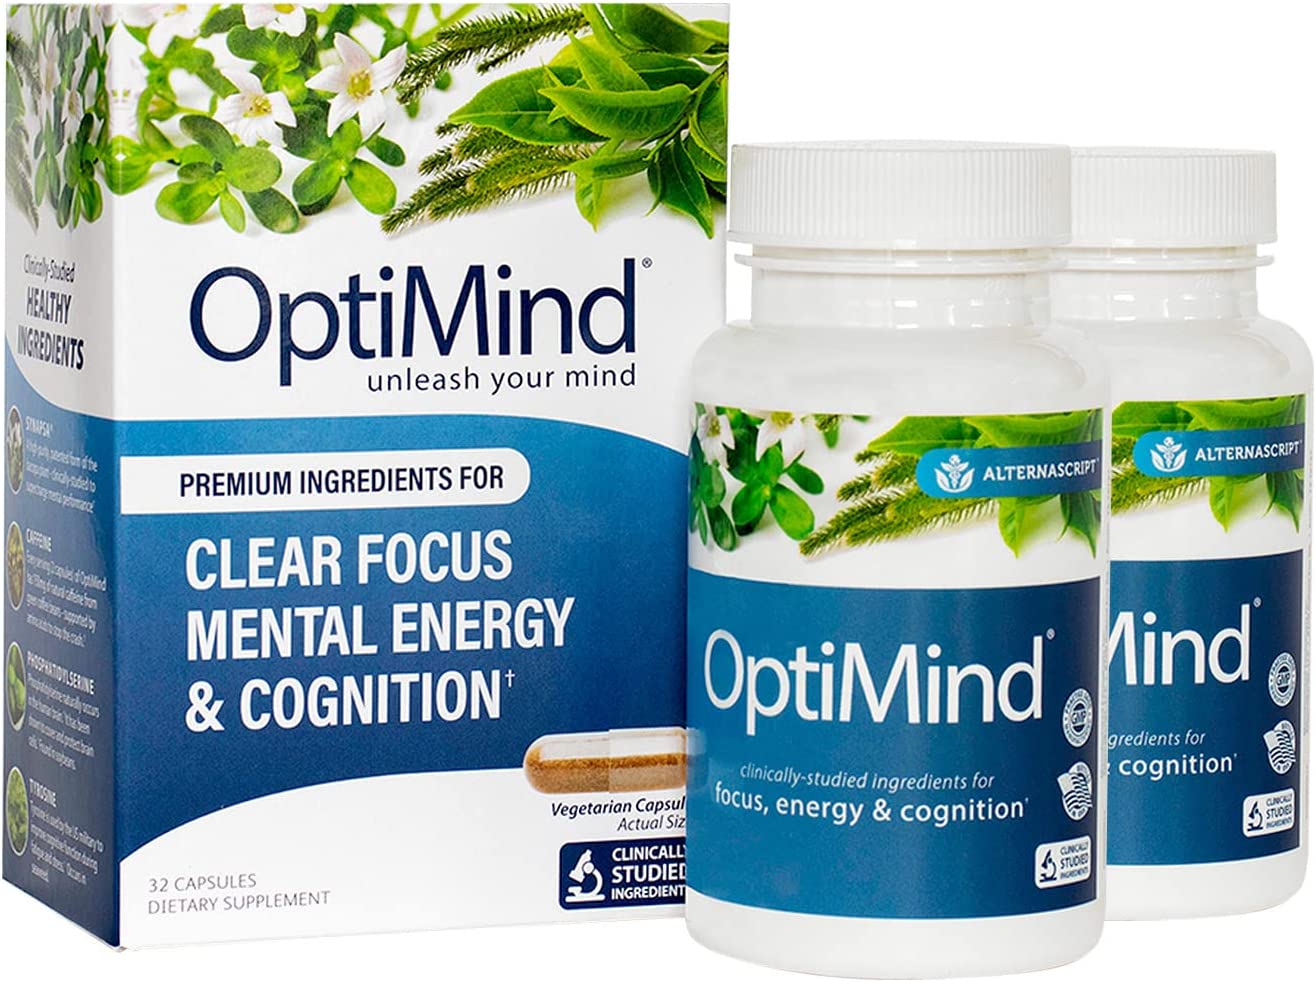 Optimind Nootropics Brain Booster Supplement | Enhance Focus and Cognition, Improve Retention, Sustain Energy | Clinically Studied Ingredients, Bacopa, Tyrosine, Huperzine A, GABA - 1 Bottle (32 Ct)